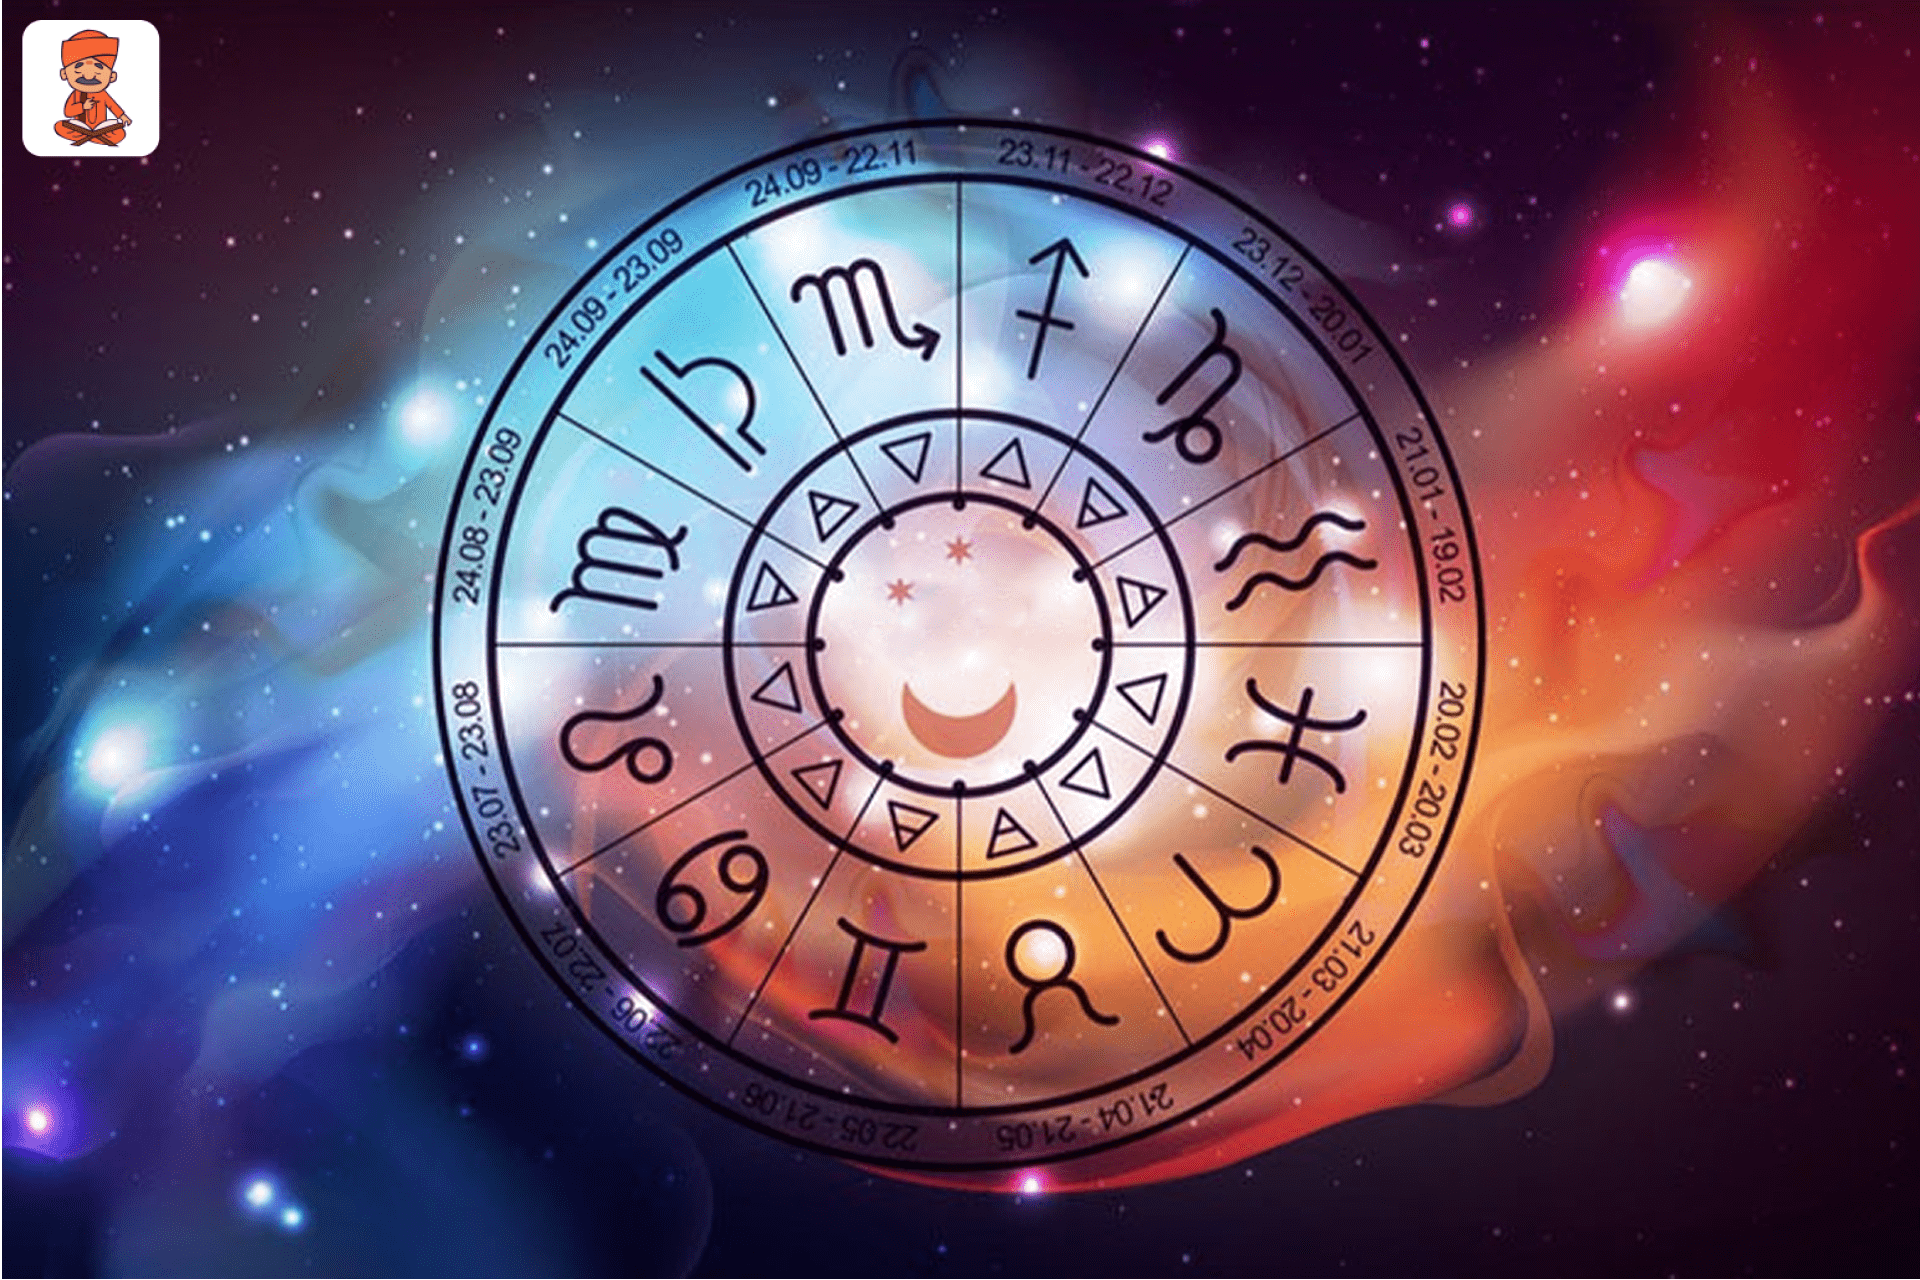 Should Humans Believe In Astrology? What Is The Science Behind It?